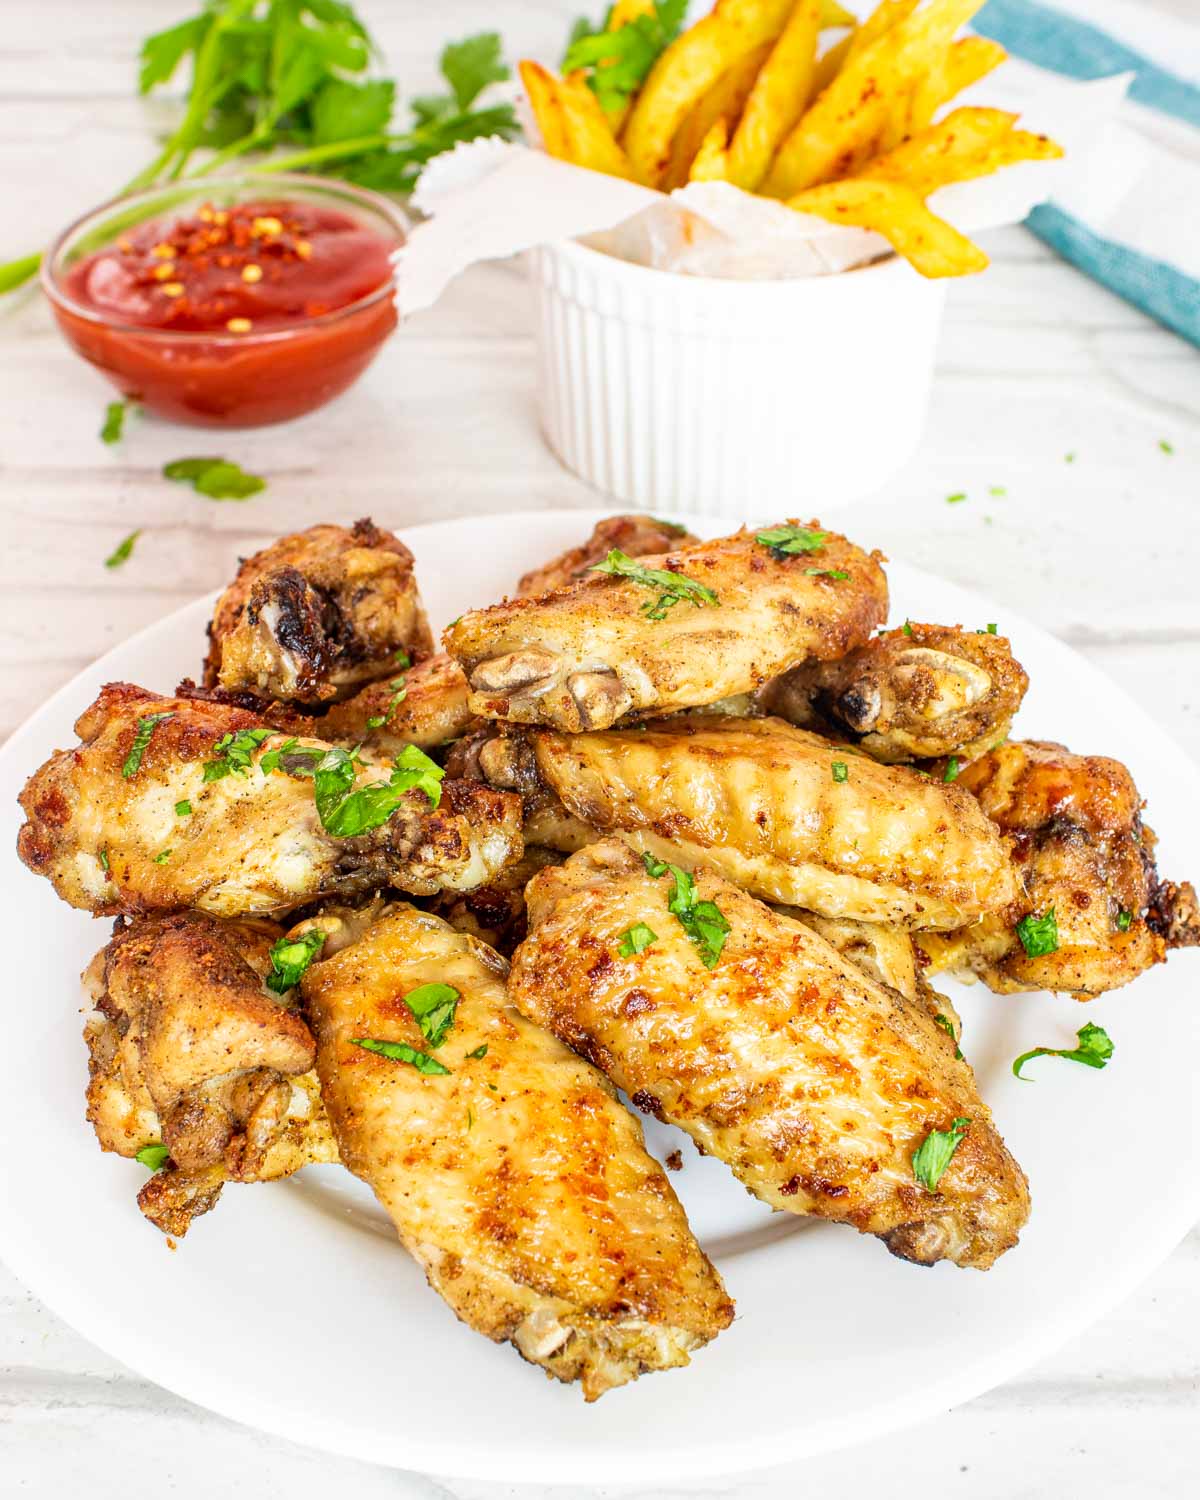 chicken wings on a white plate with french fries in the background.